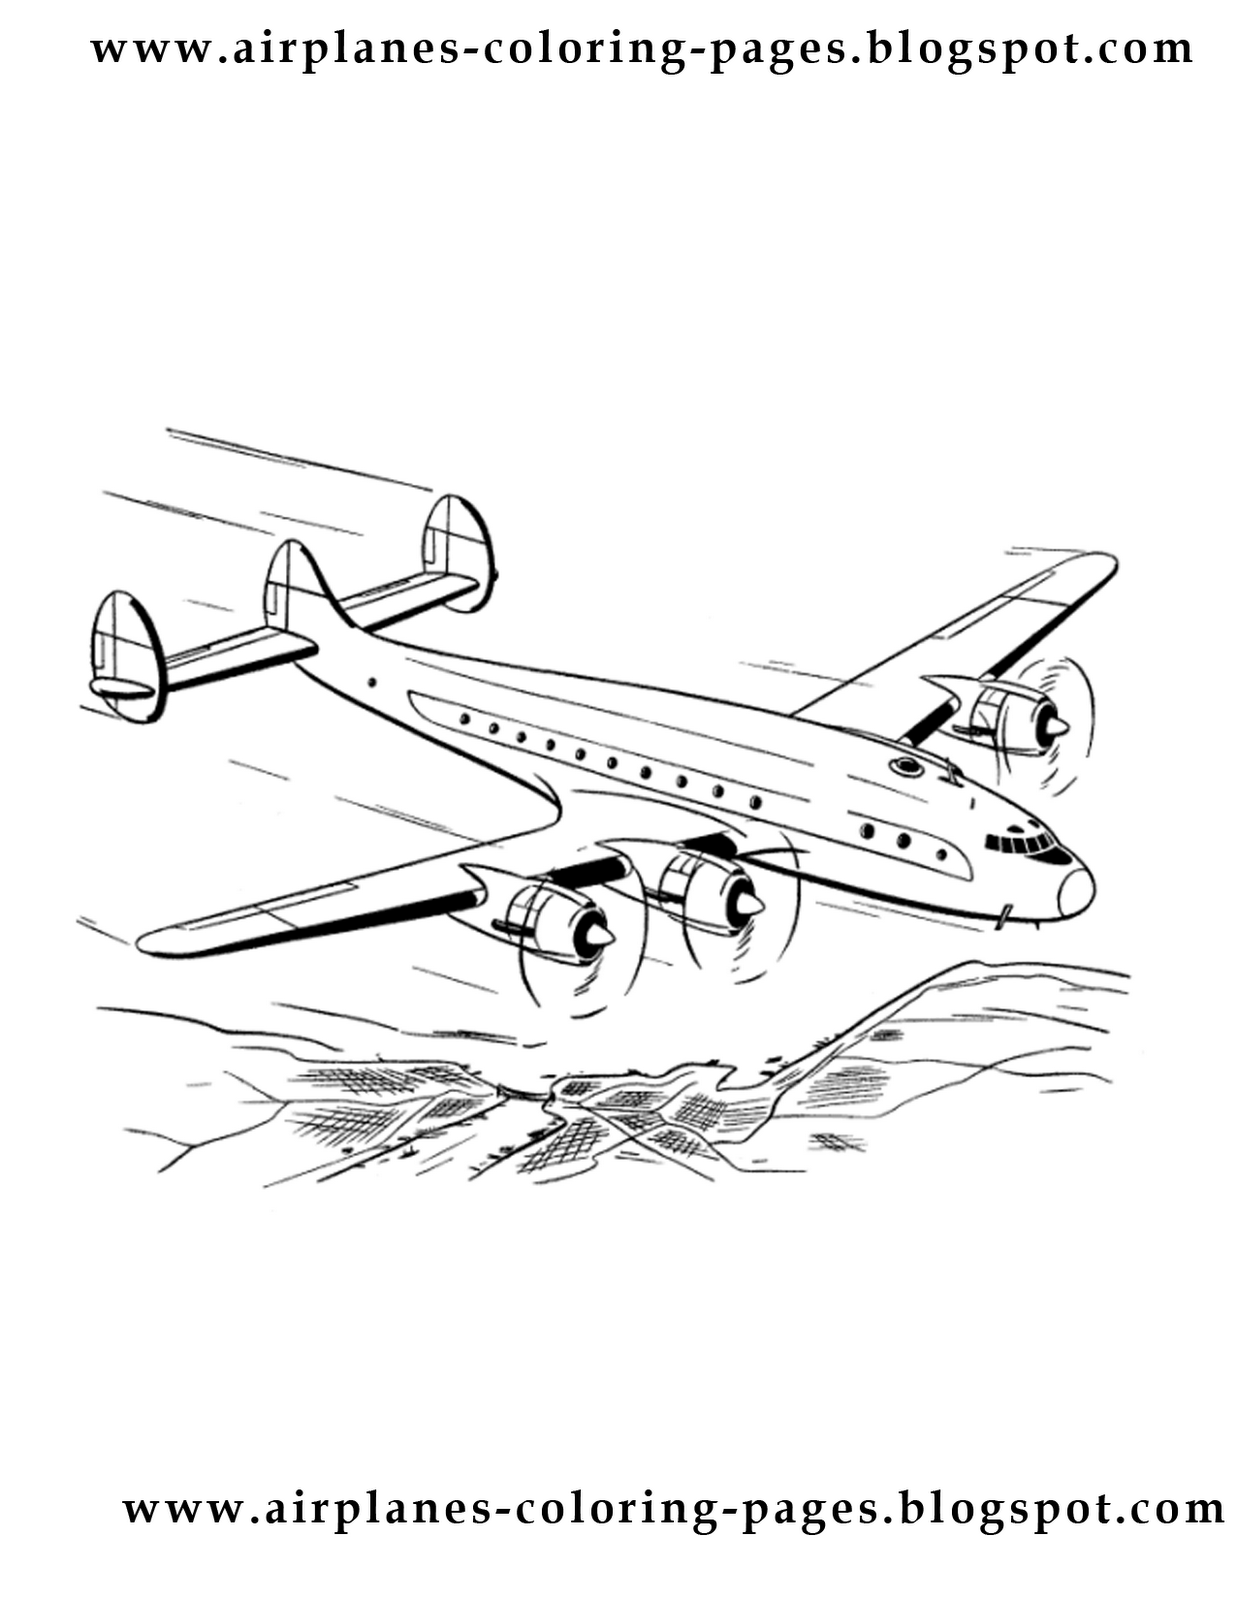  airplane coloring pages | airplanes | airplane tickets | airline airplanes | coloring book | coloring pages for kids | #17